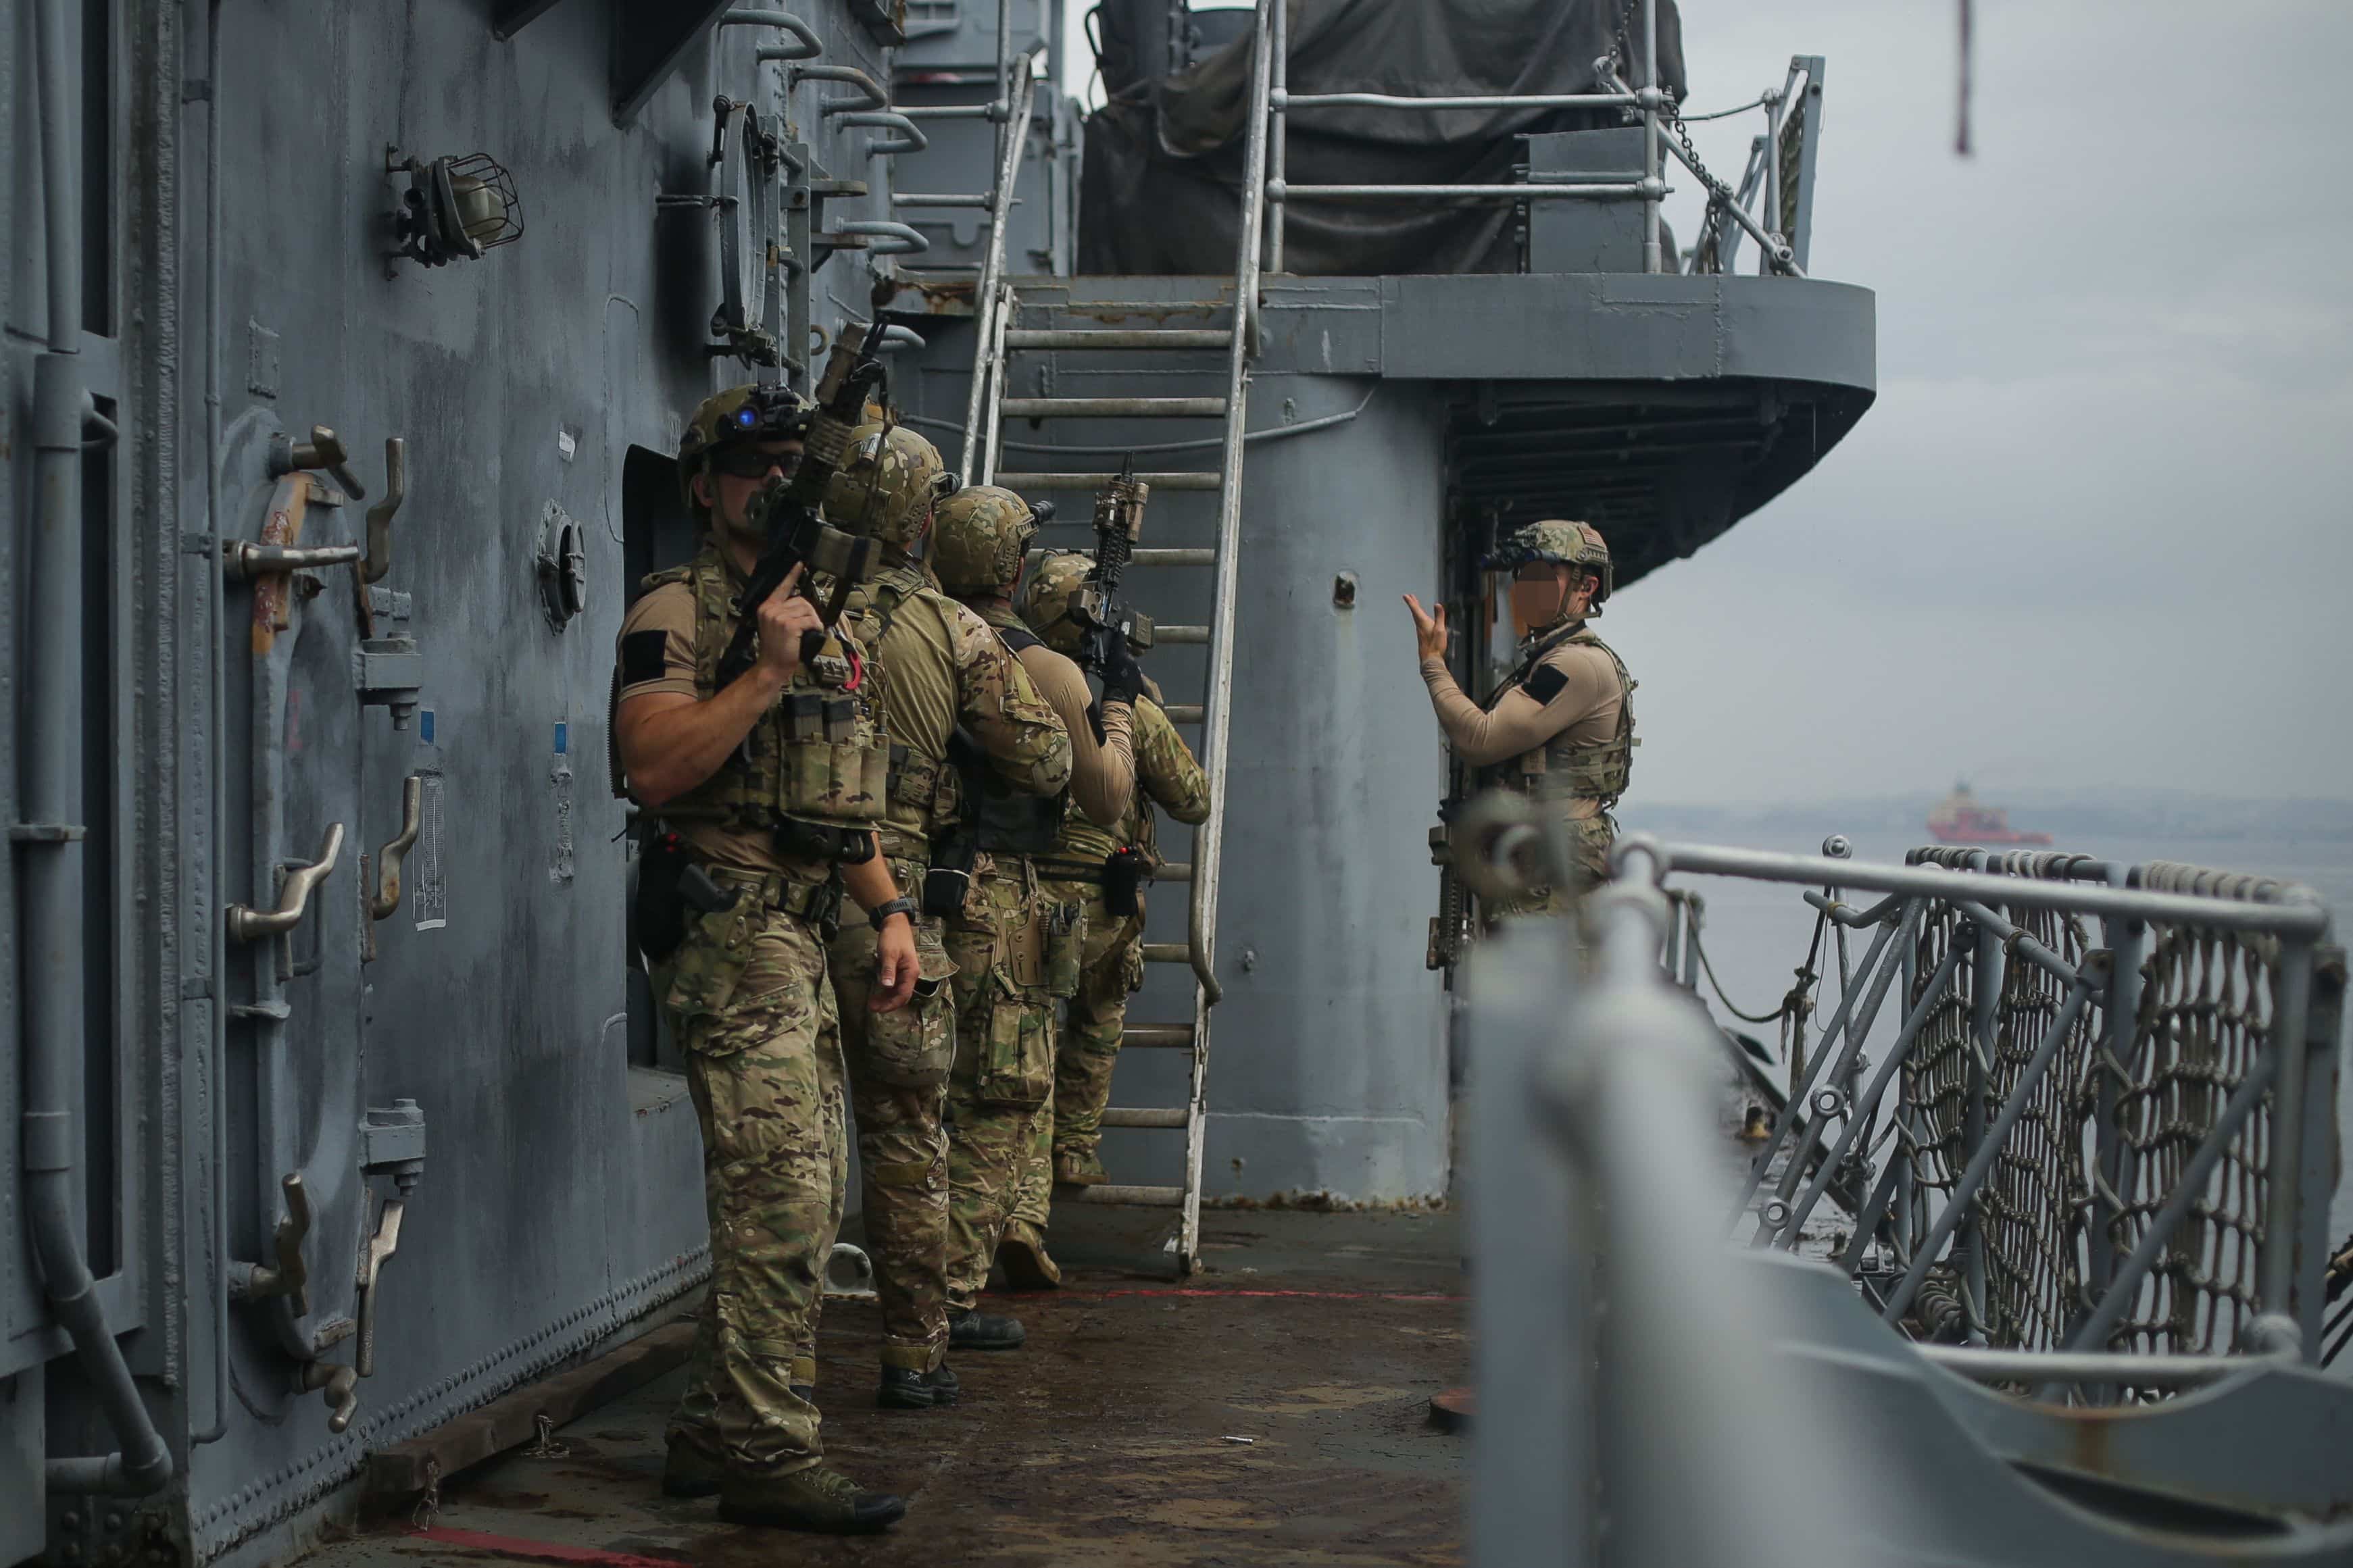 U.S. Sailors assigned to a Navy SEAL Team, make their way toward a command deck during Visit, Board, Search, and Seizure (VBSS) training with partner nations during exercise UNITAS LXIII in Rio de Janeiro, Sept. 12, 2022.